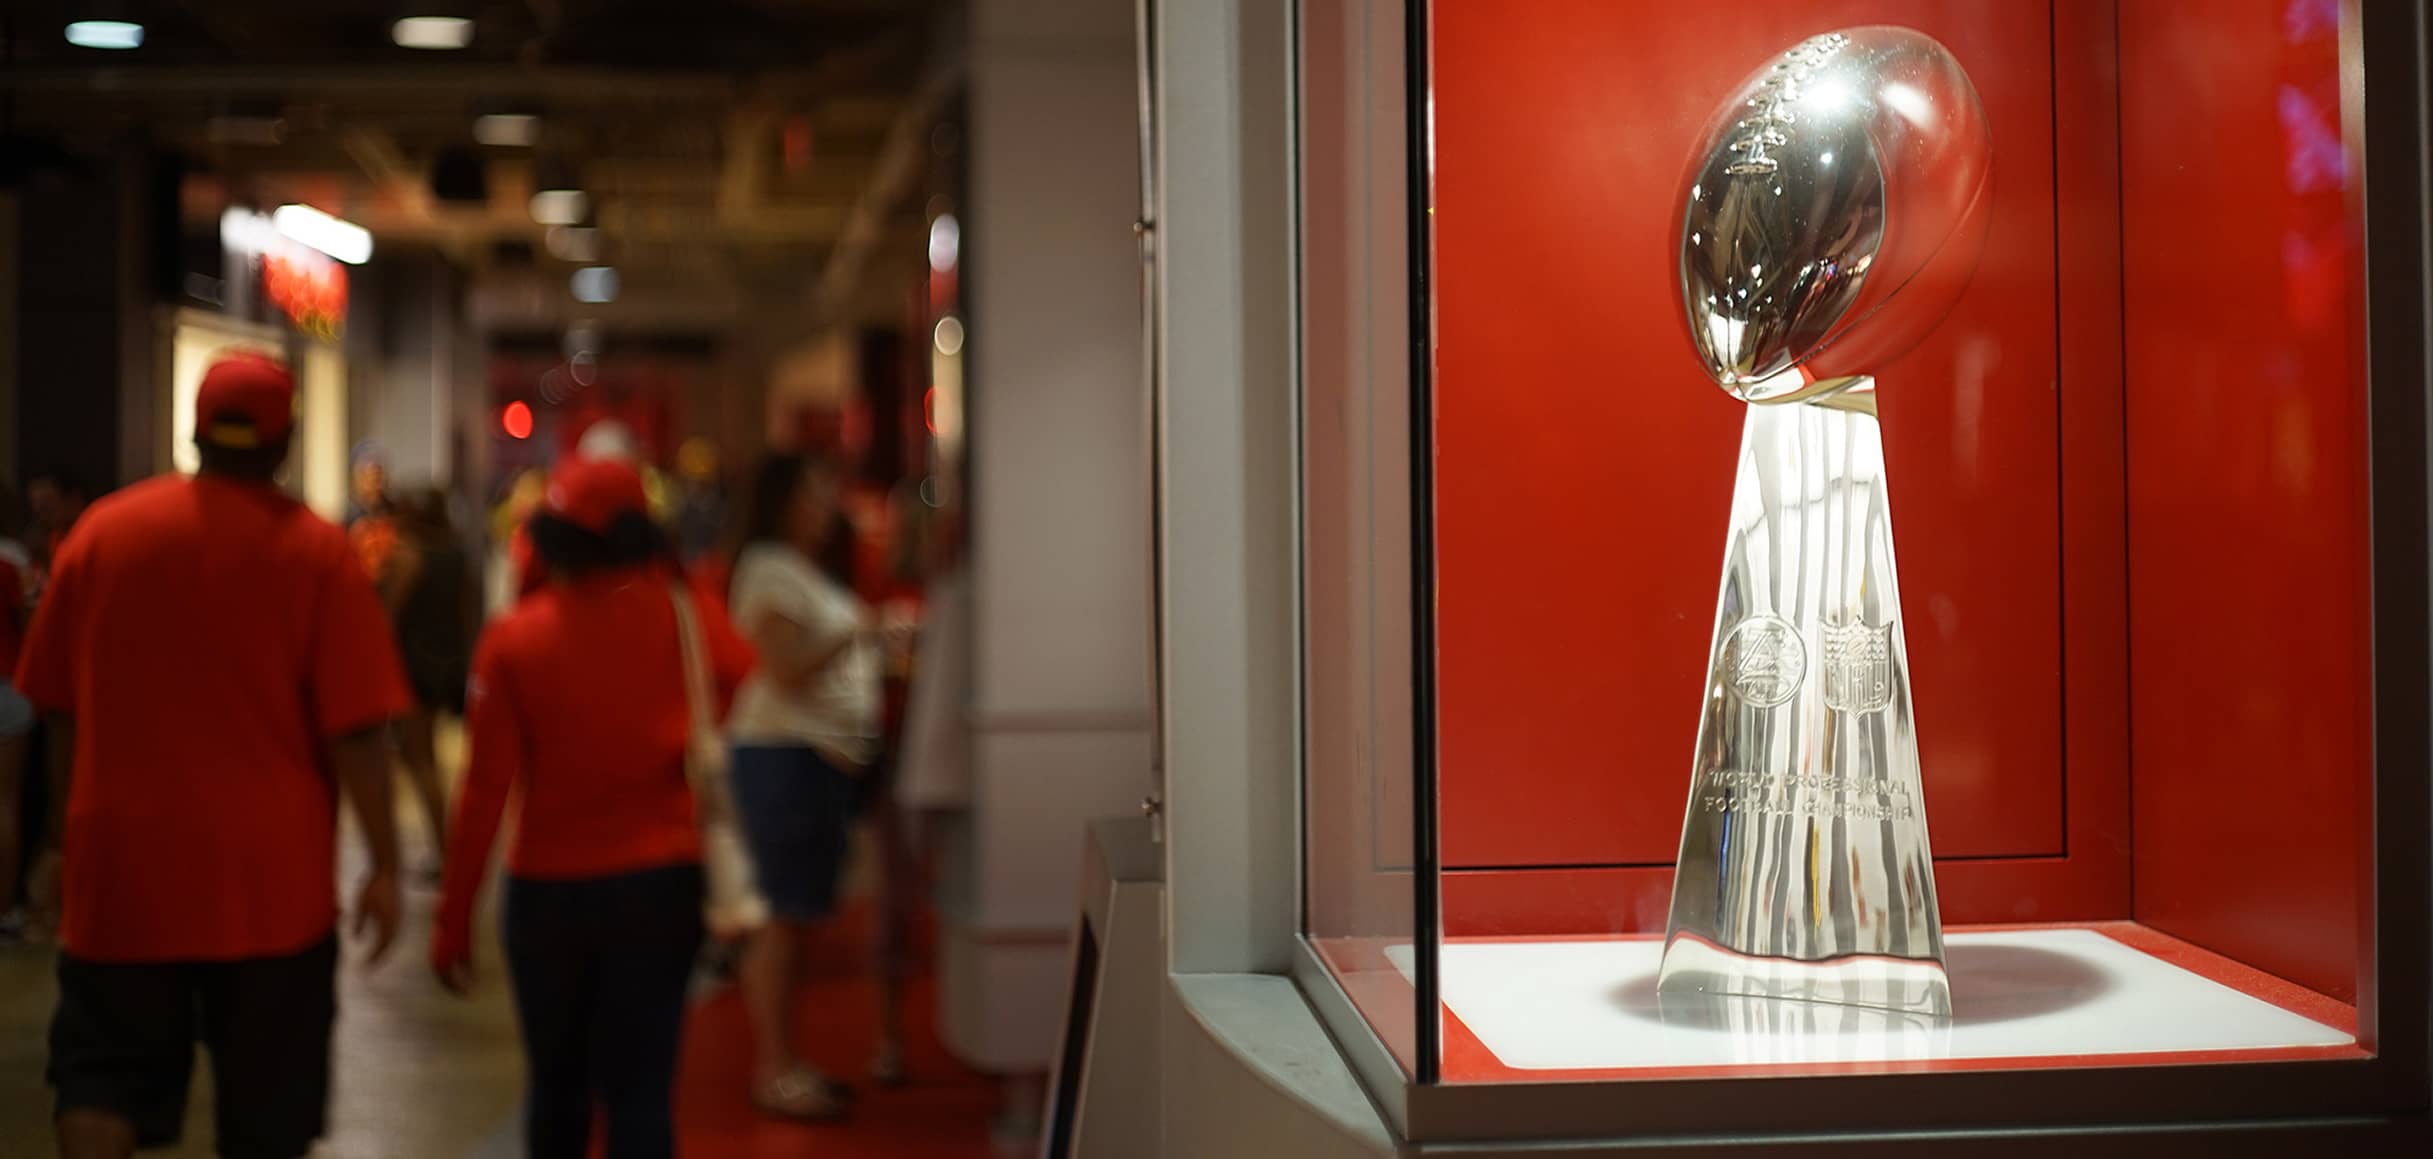 Super bowl traditions every new fan should know